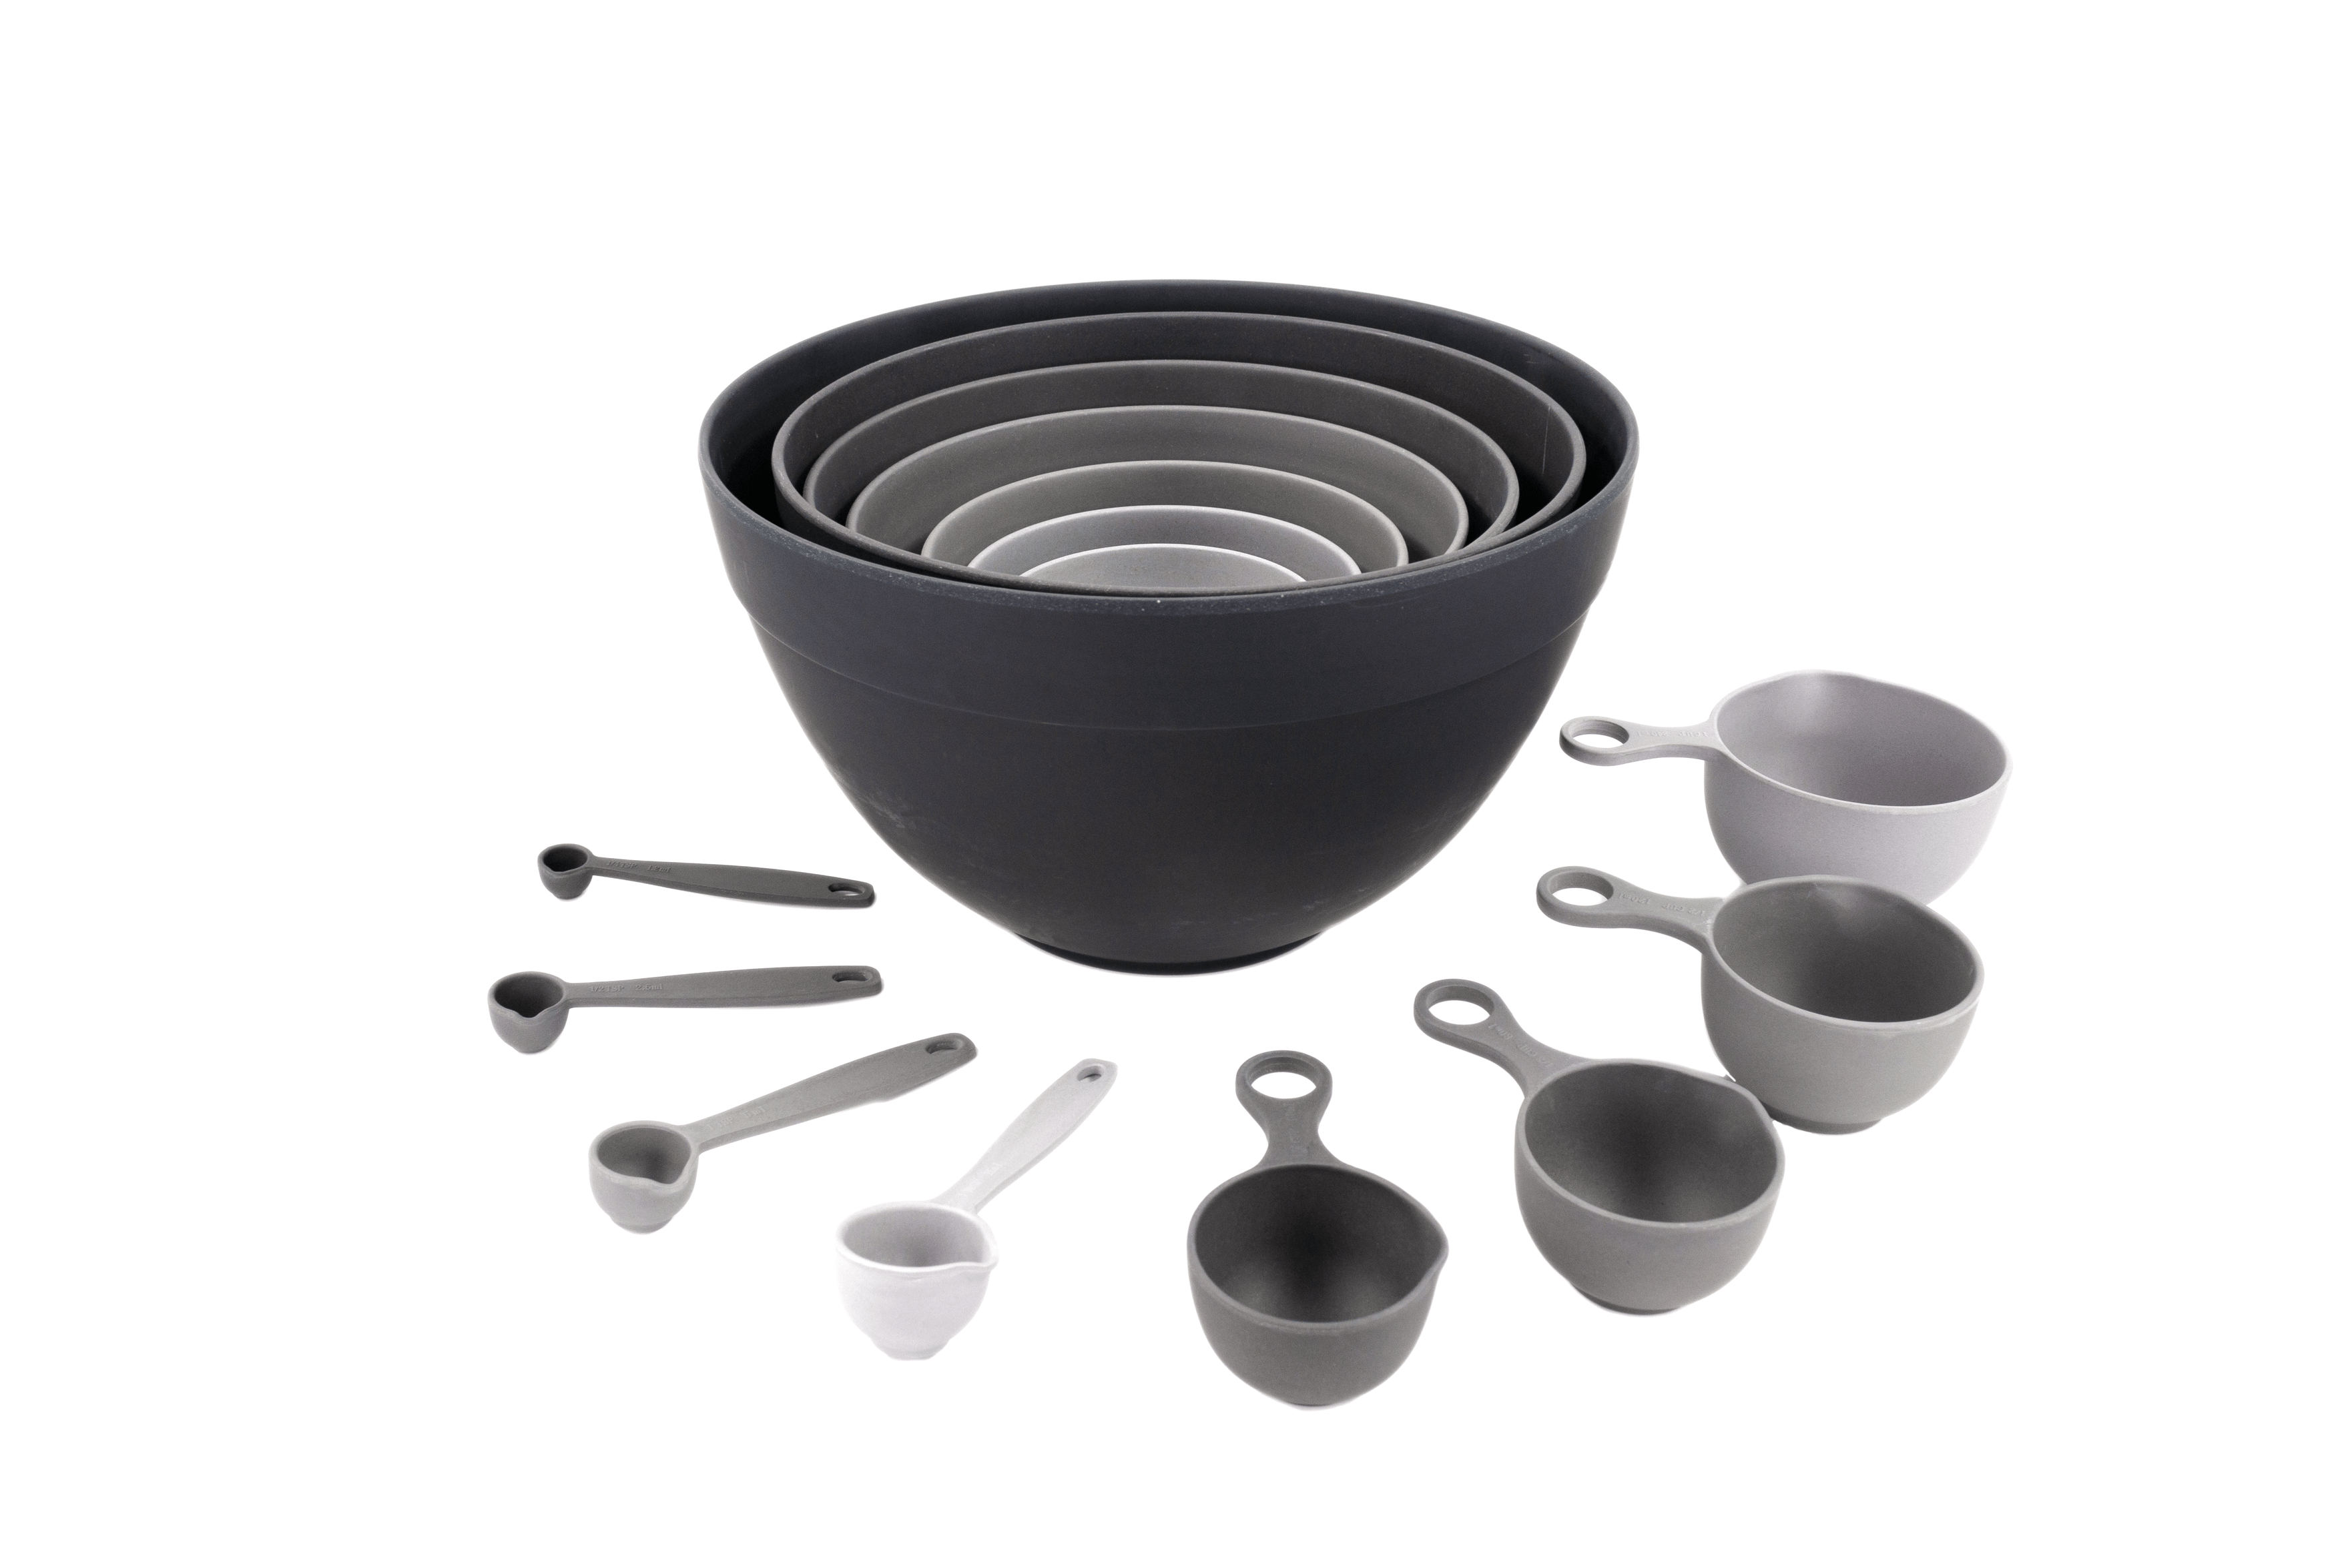 Bamboozle Home Baking Bundle: Nested bowls, measuring cups & spoons! Eco-friendly tools for organized, delicious baking. Shop now & master your craft!